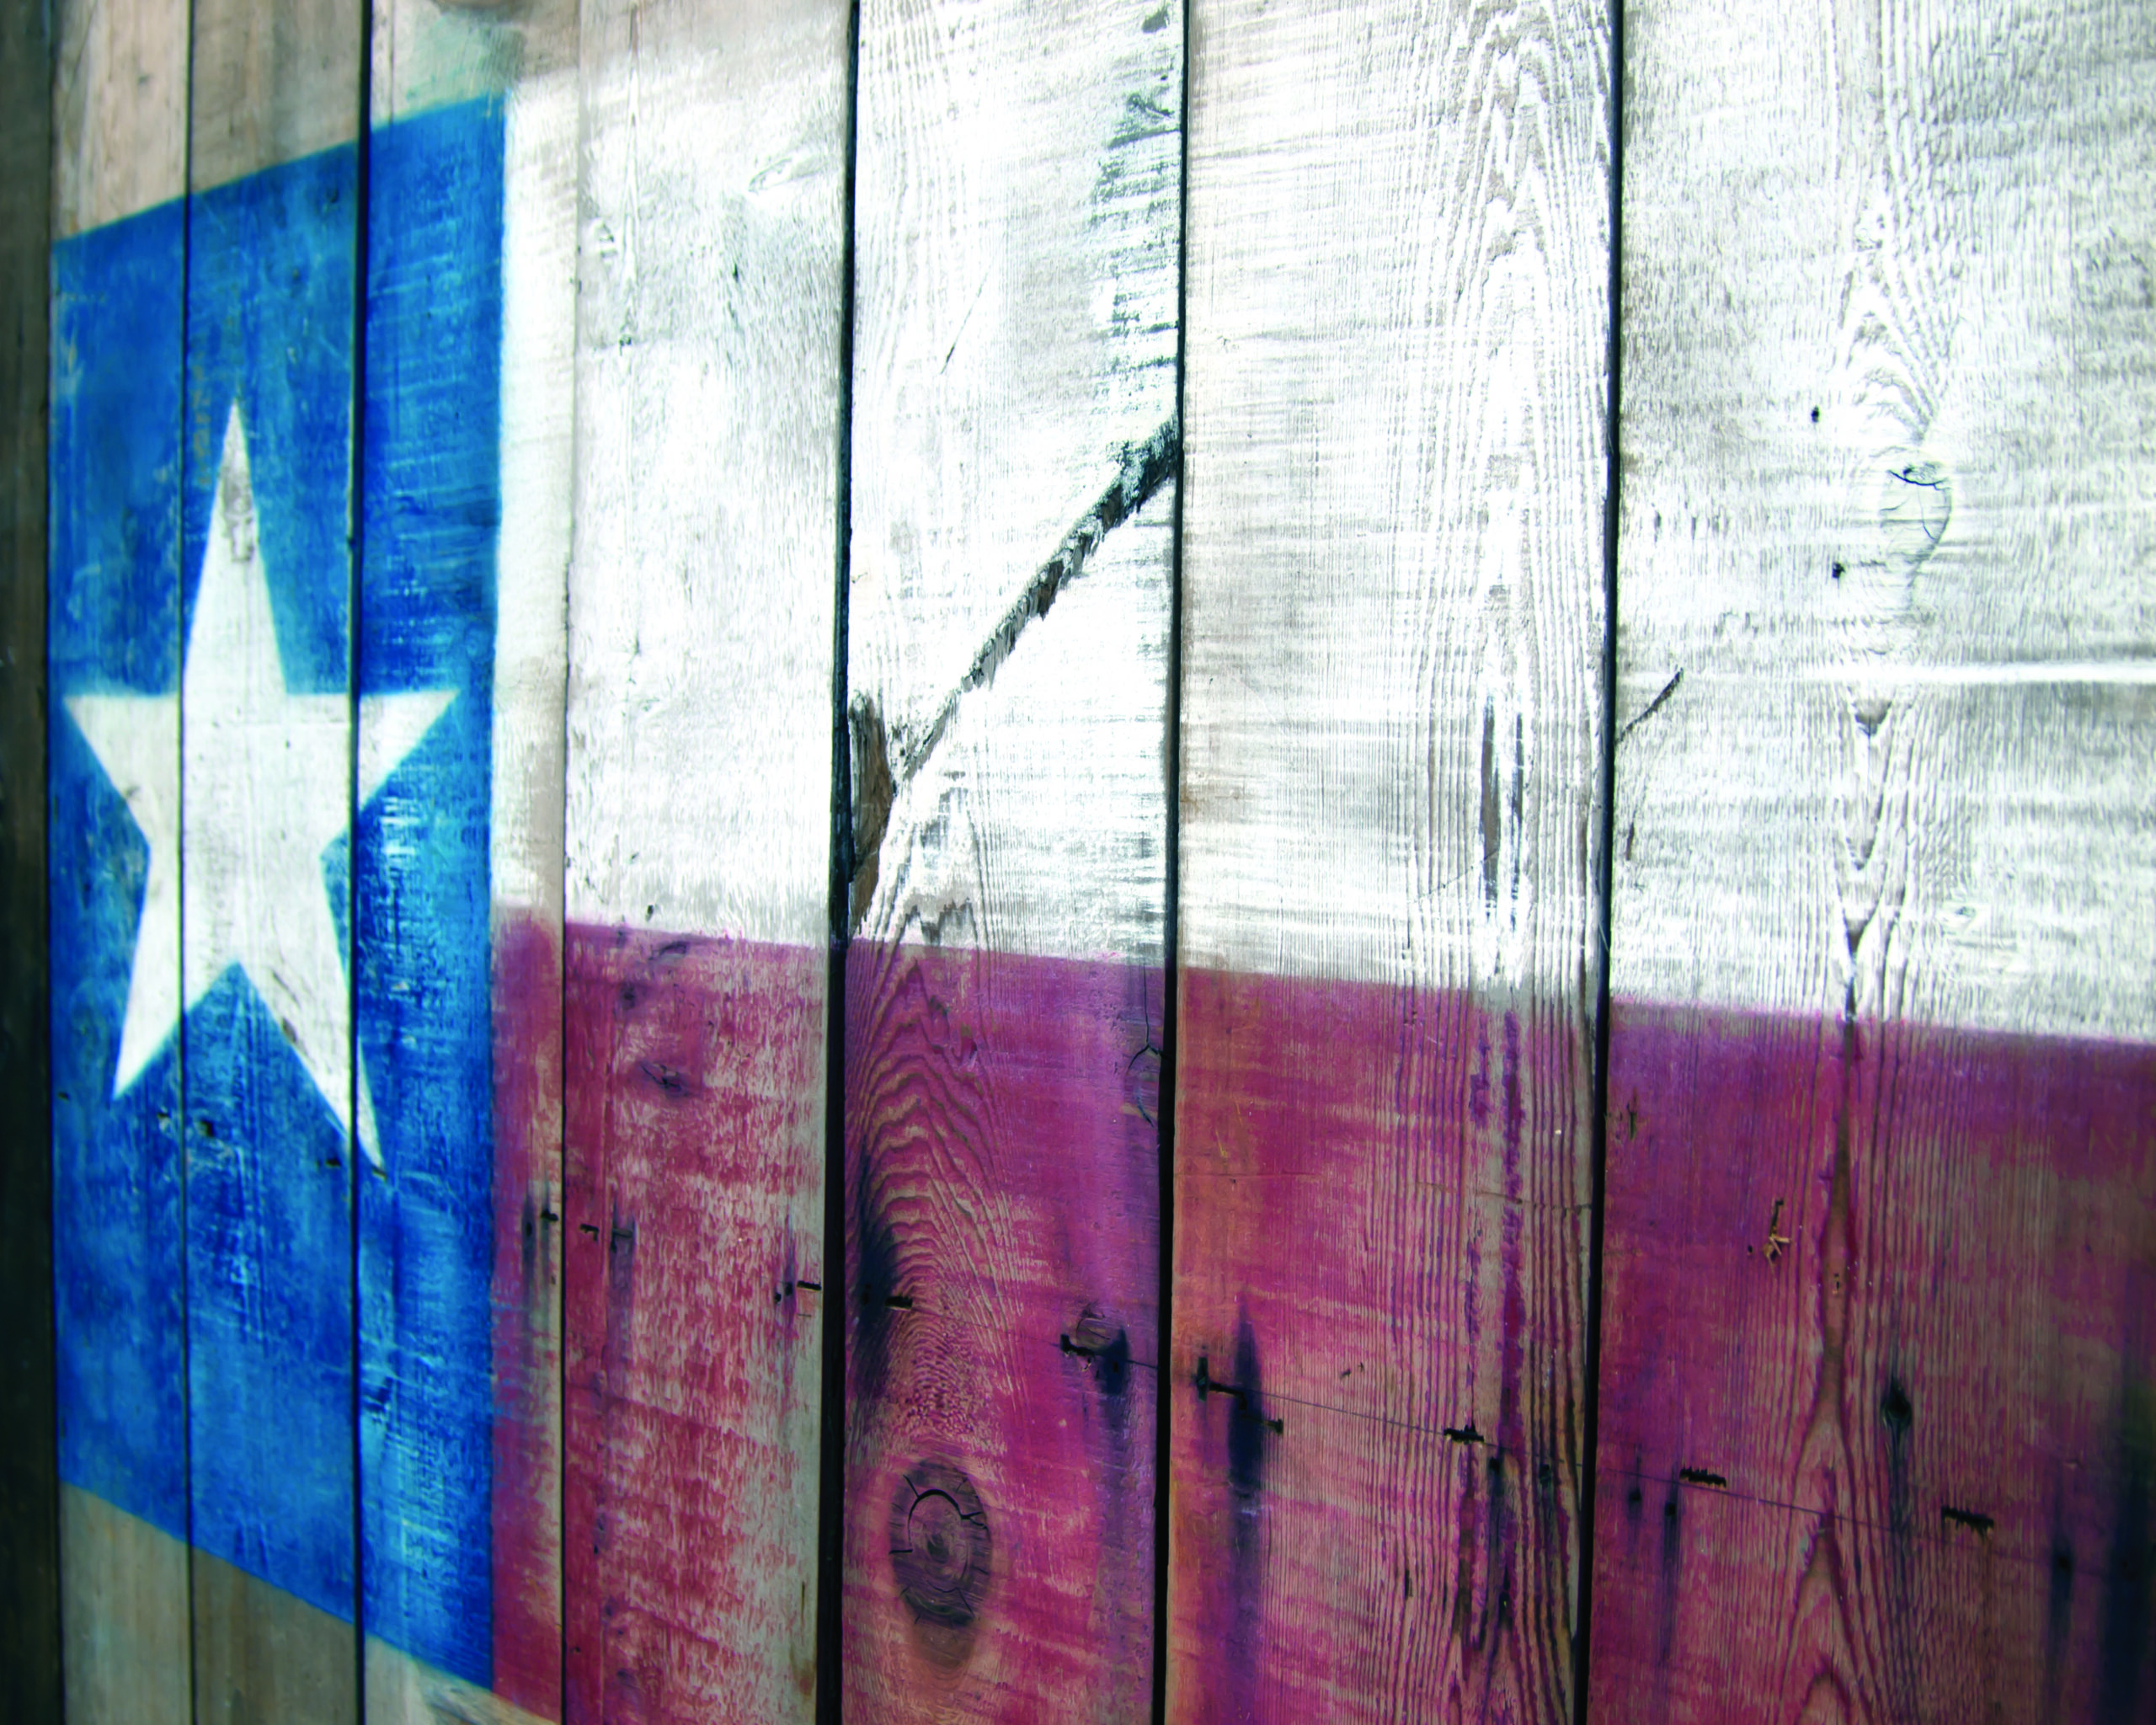 Texas Flag Painted On Wood Wall 185123535 Scaled 